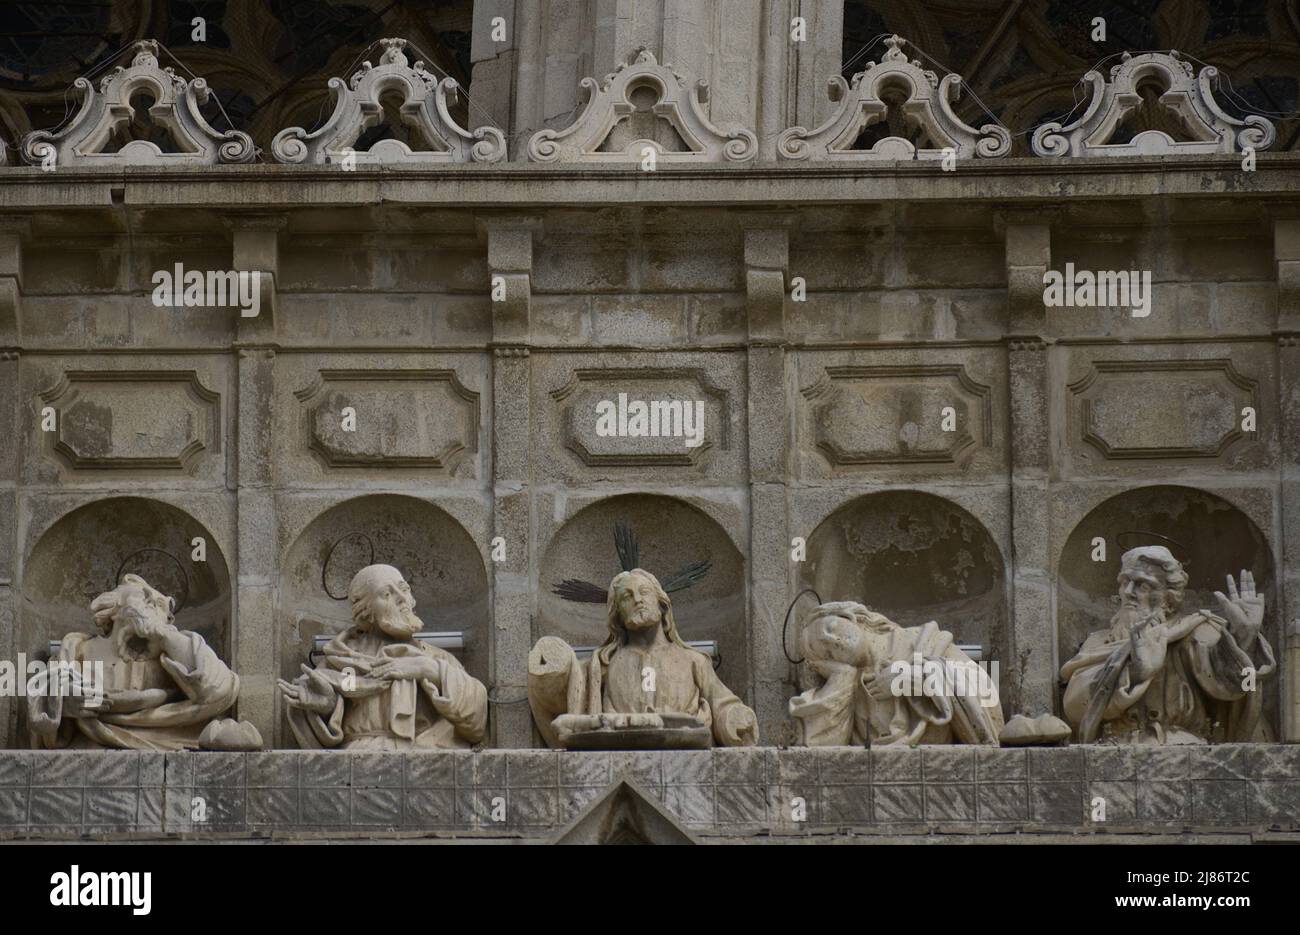 Spain, Castile-La Mancha, Toledo. Cathedral of Saint Mary. Gate of Forgiveness. High relief depicting the Last Supper, at the centre of the main facade, by Mariano Salvatierra Serrano (1752-1808). Stock Photo